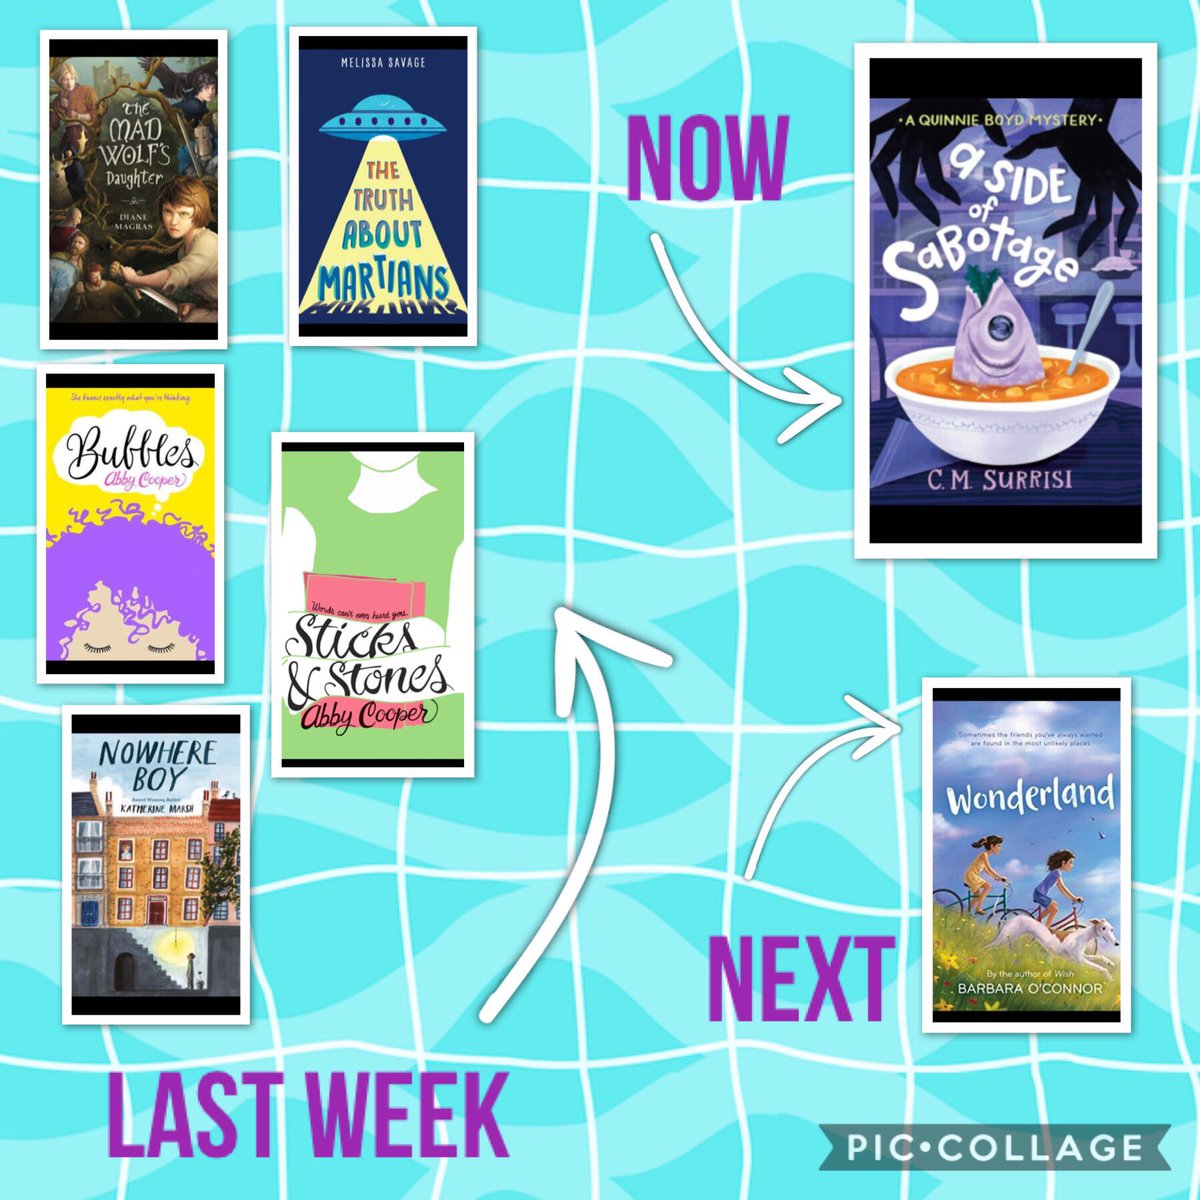 #MGBookVillage #MGBookMonday #bookexpedition